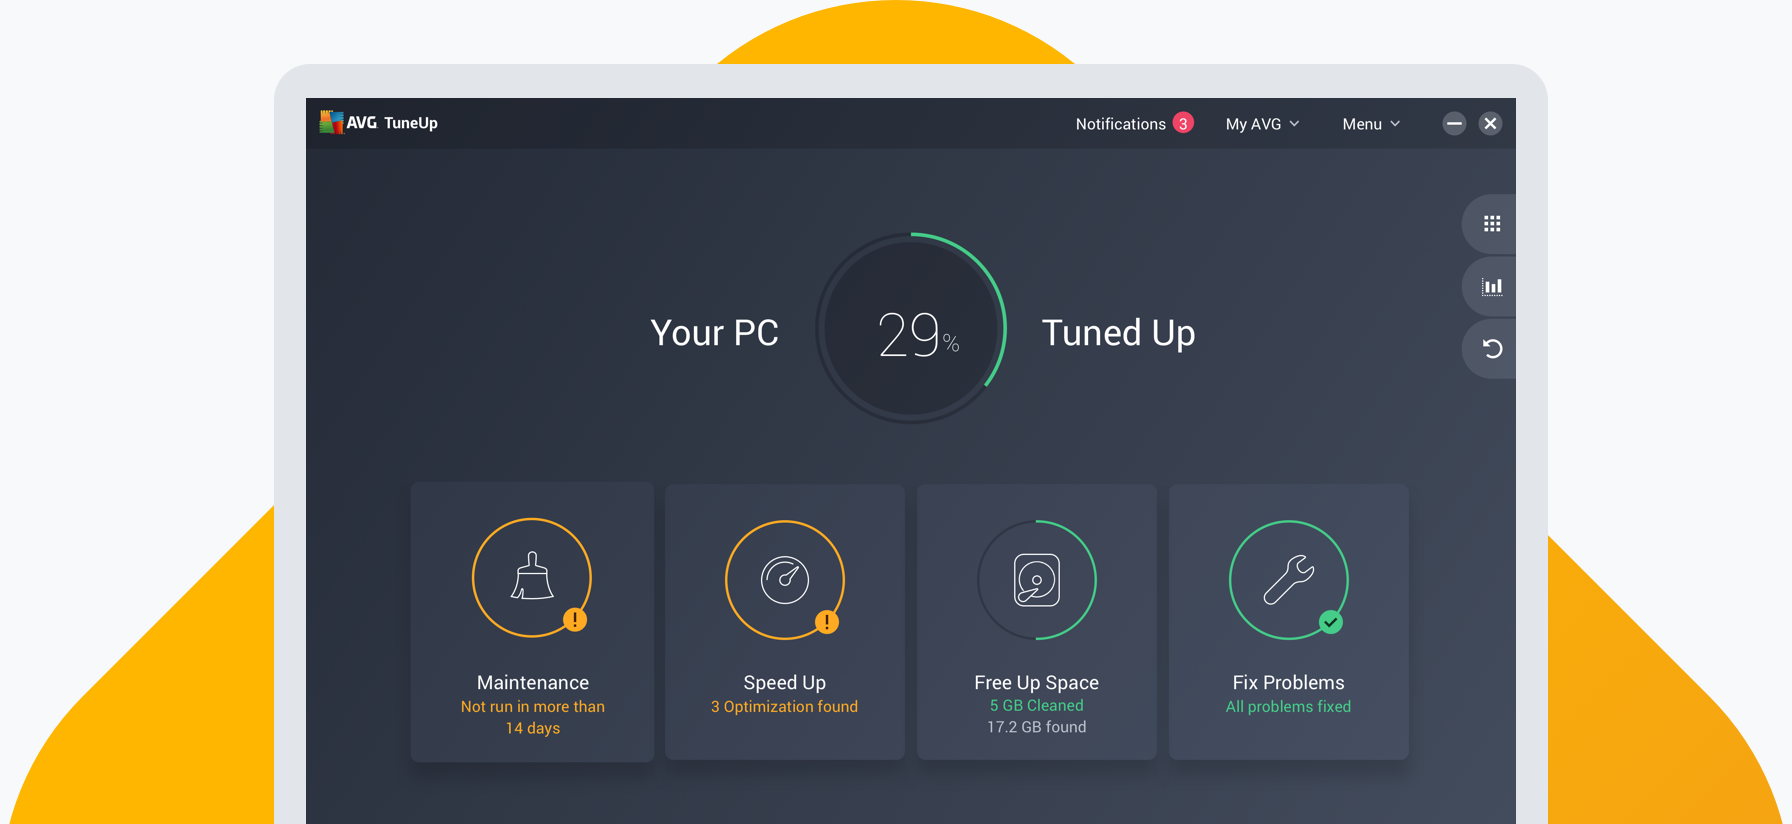 avg tuneup for android